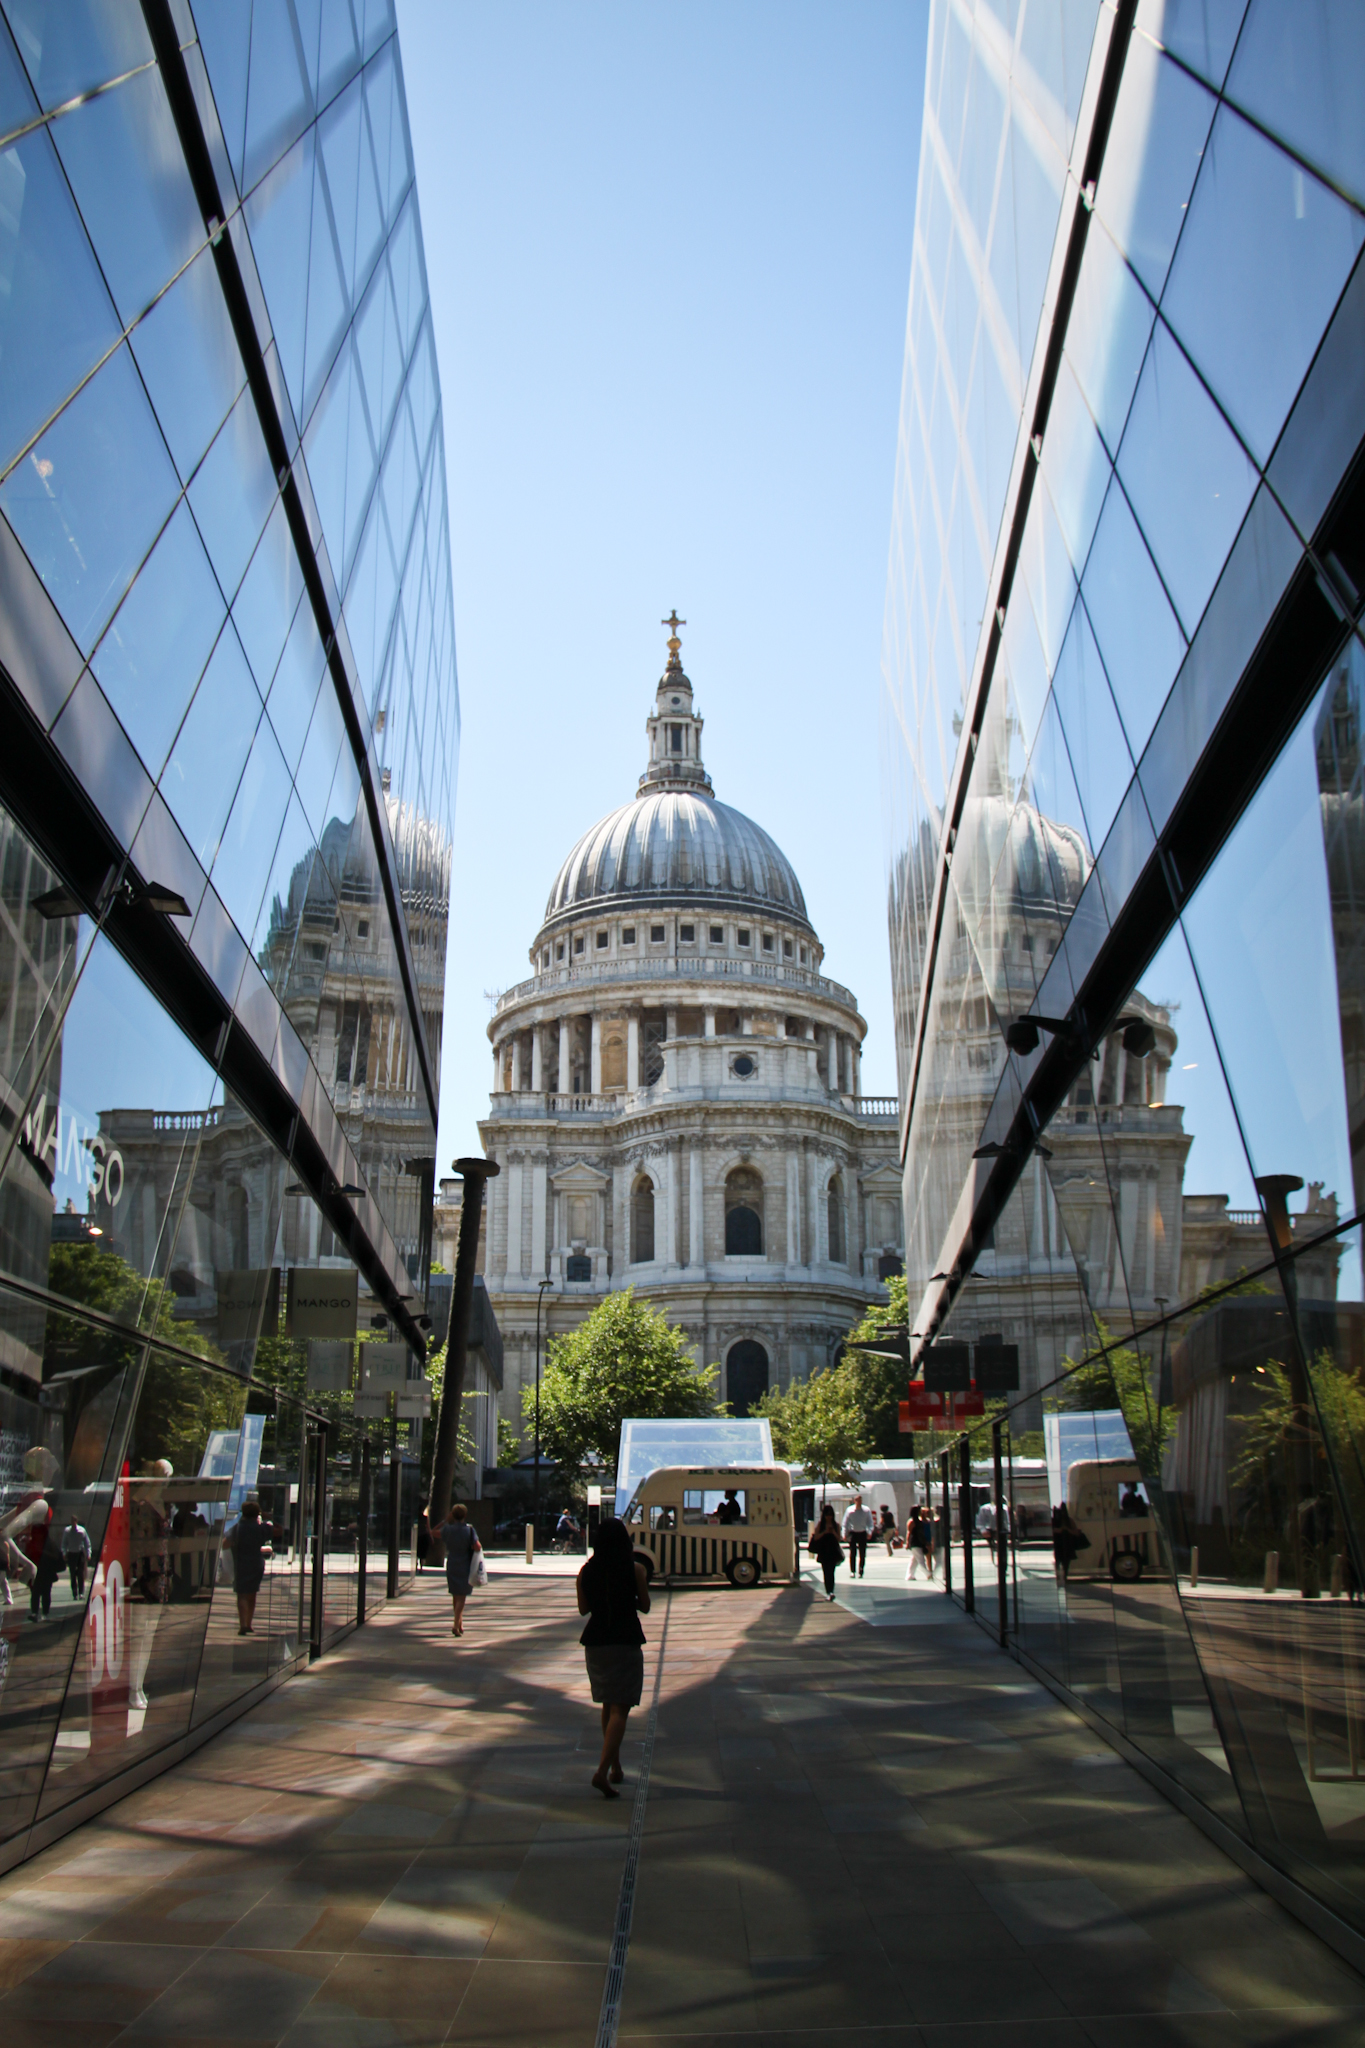  The beautiful St. Paul's Cathedral 